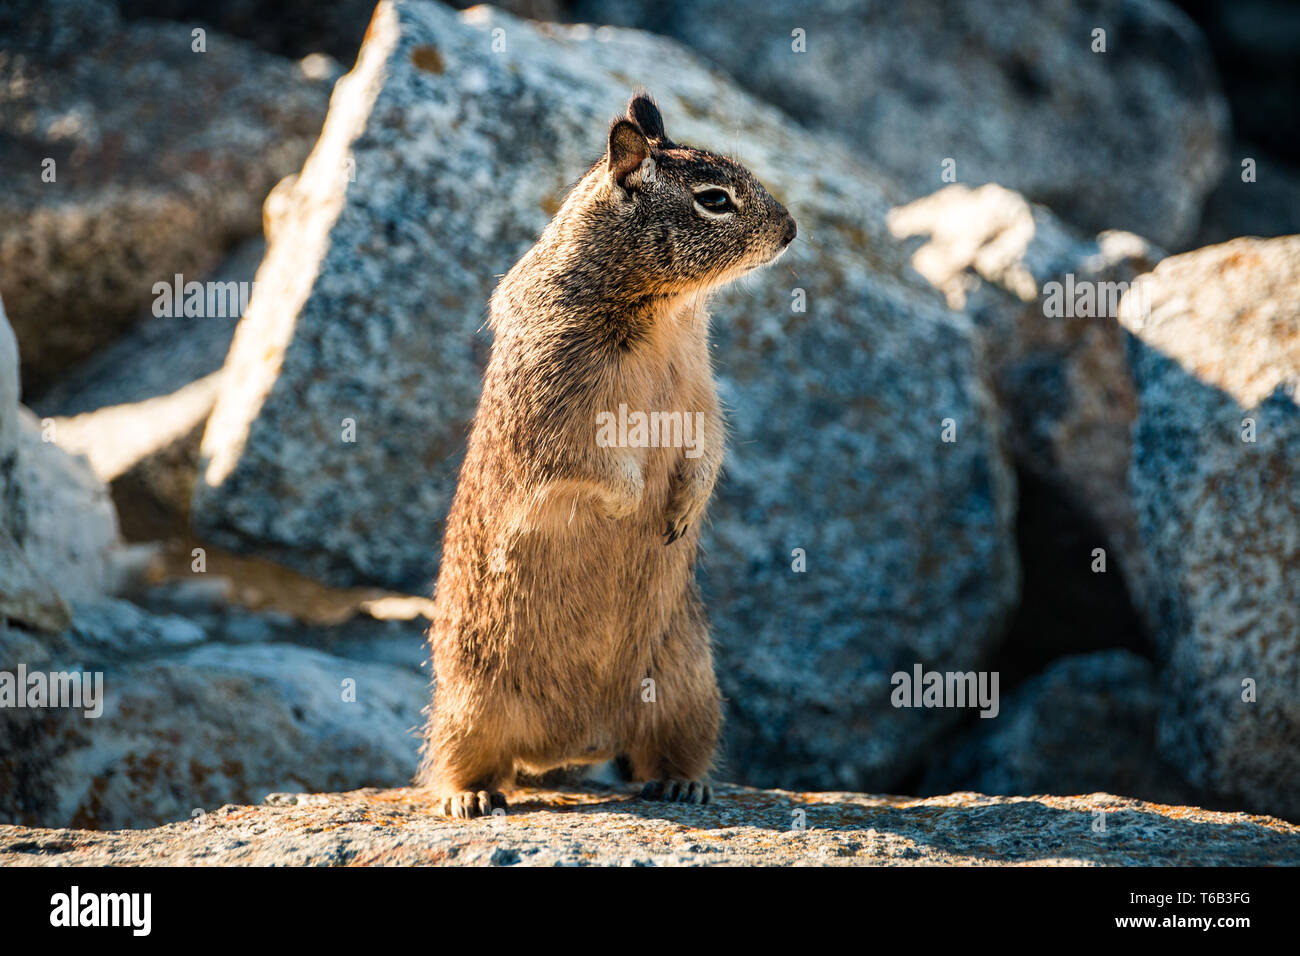 sweet curious california ground squirrel standing upright, animal in california Stock Photo